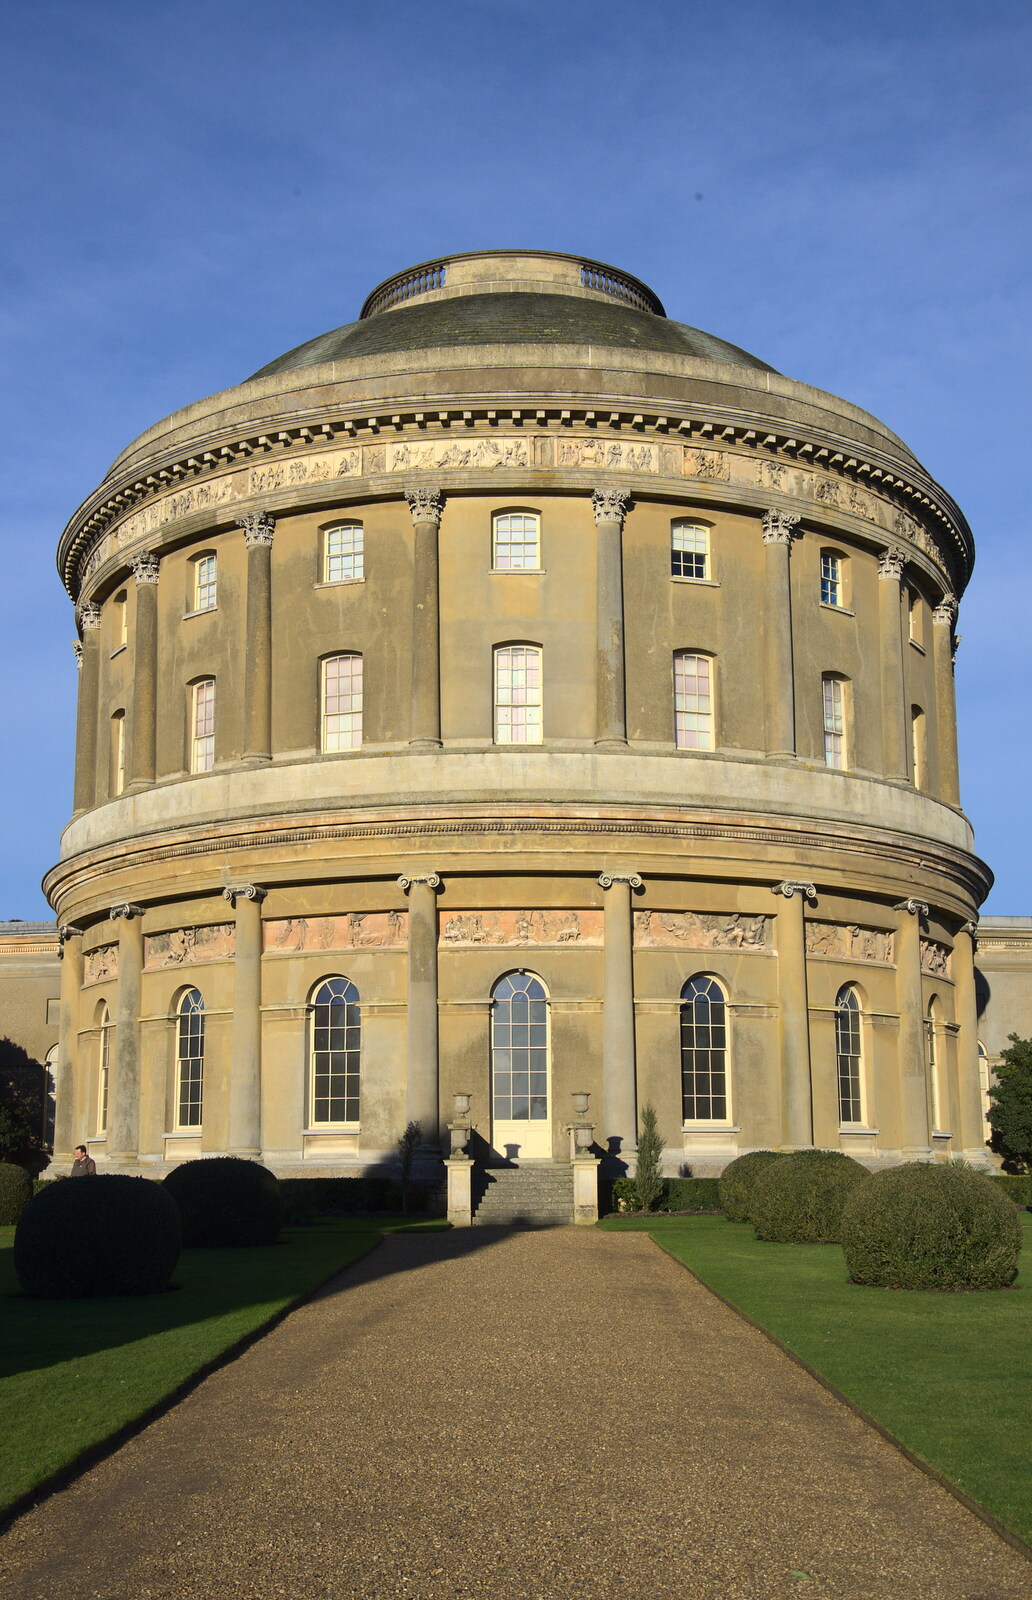 The cliché Rotunda photo from Life Below Stairs, Ickworth House, Horringer, Suffolk - 28th January 2018